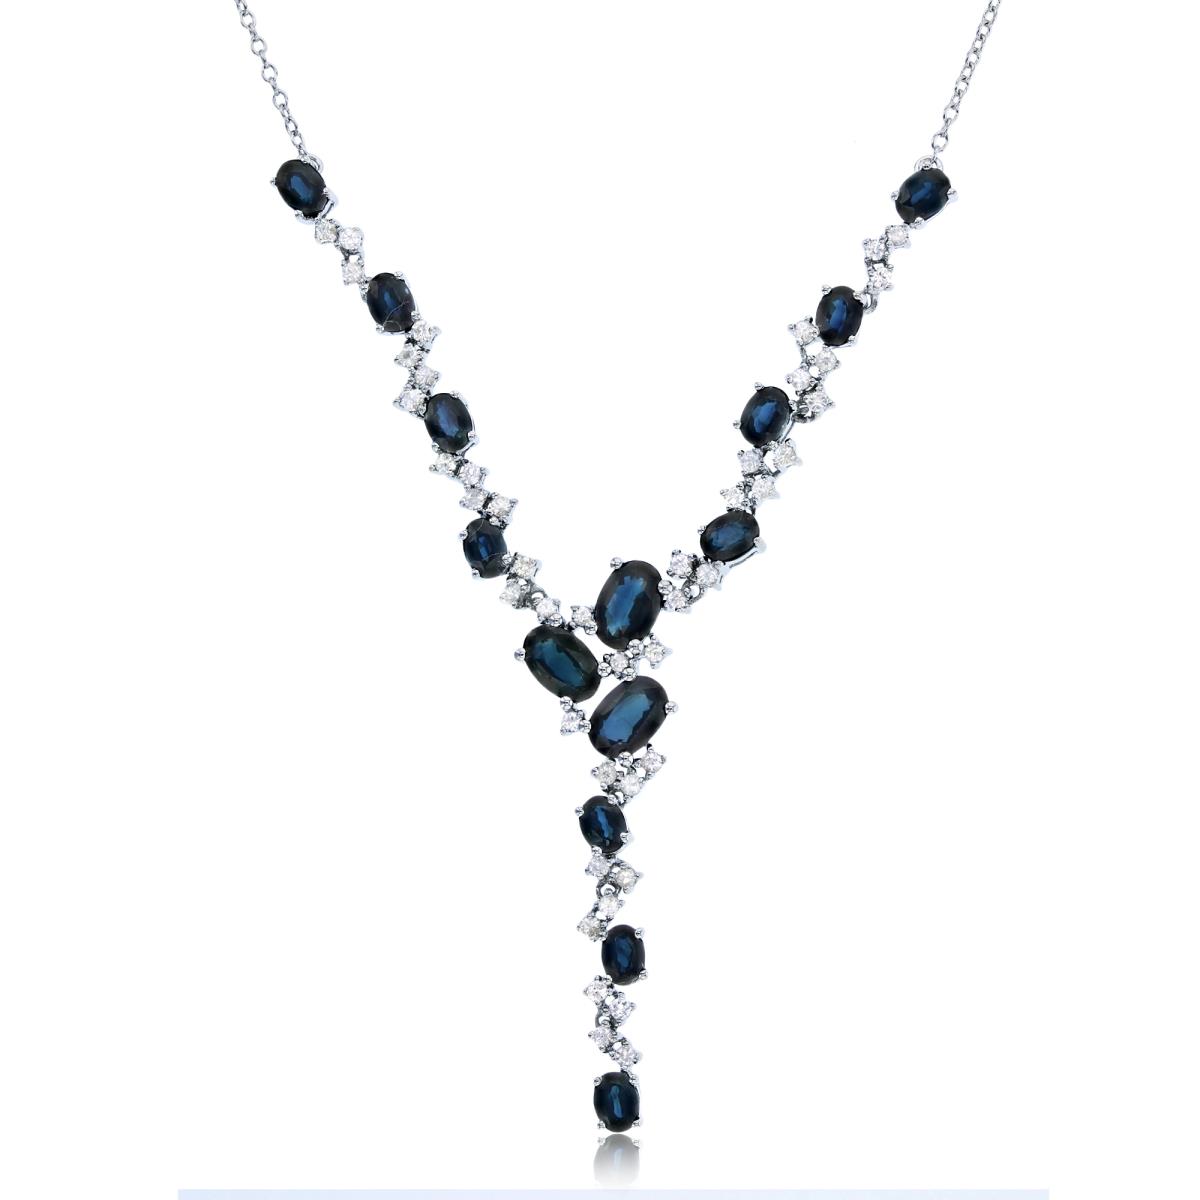 14K White Gold 6X4mm/4X3mm Ov Blue Sapphire & Rnd White Sapphire Flexy Scattered Necklace